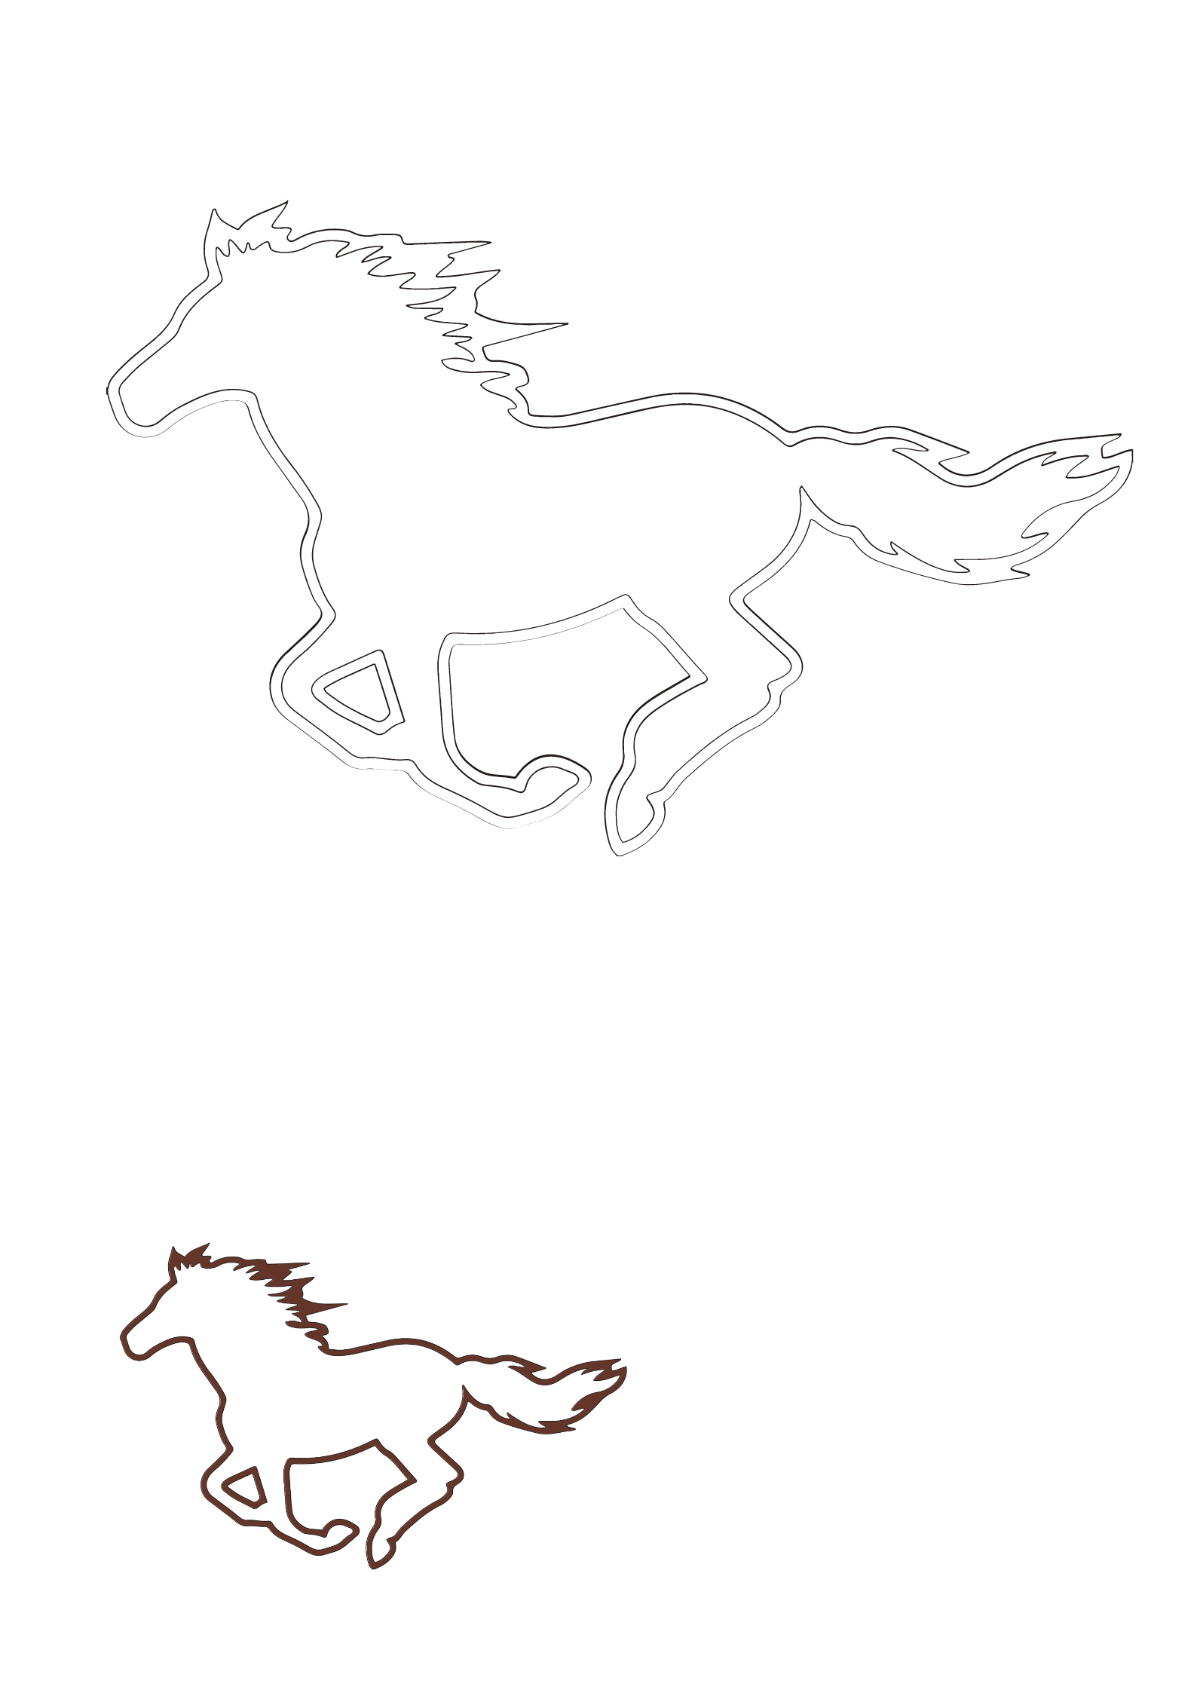 Horse Outline Coloring Page Template